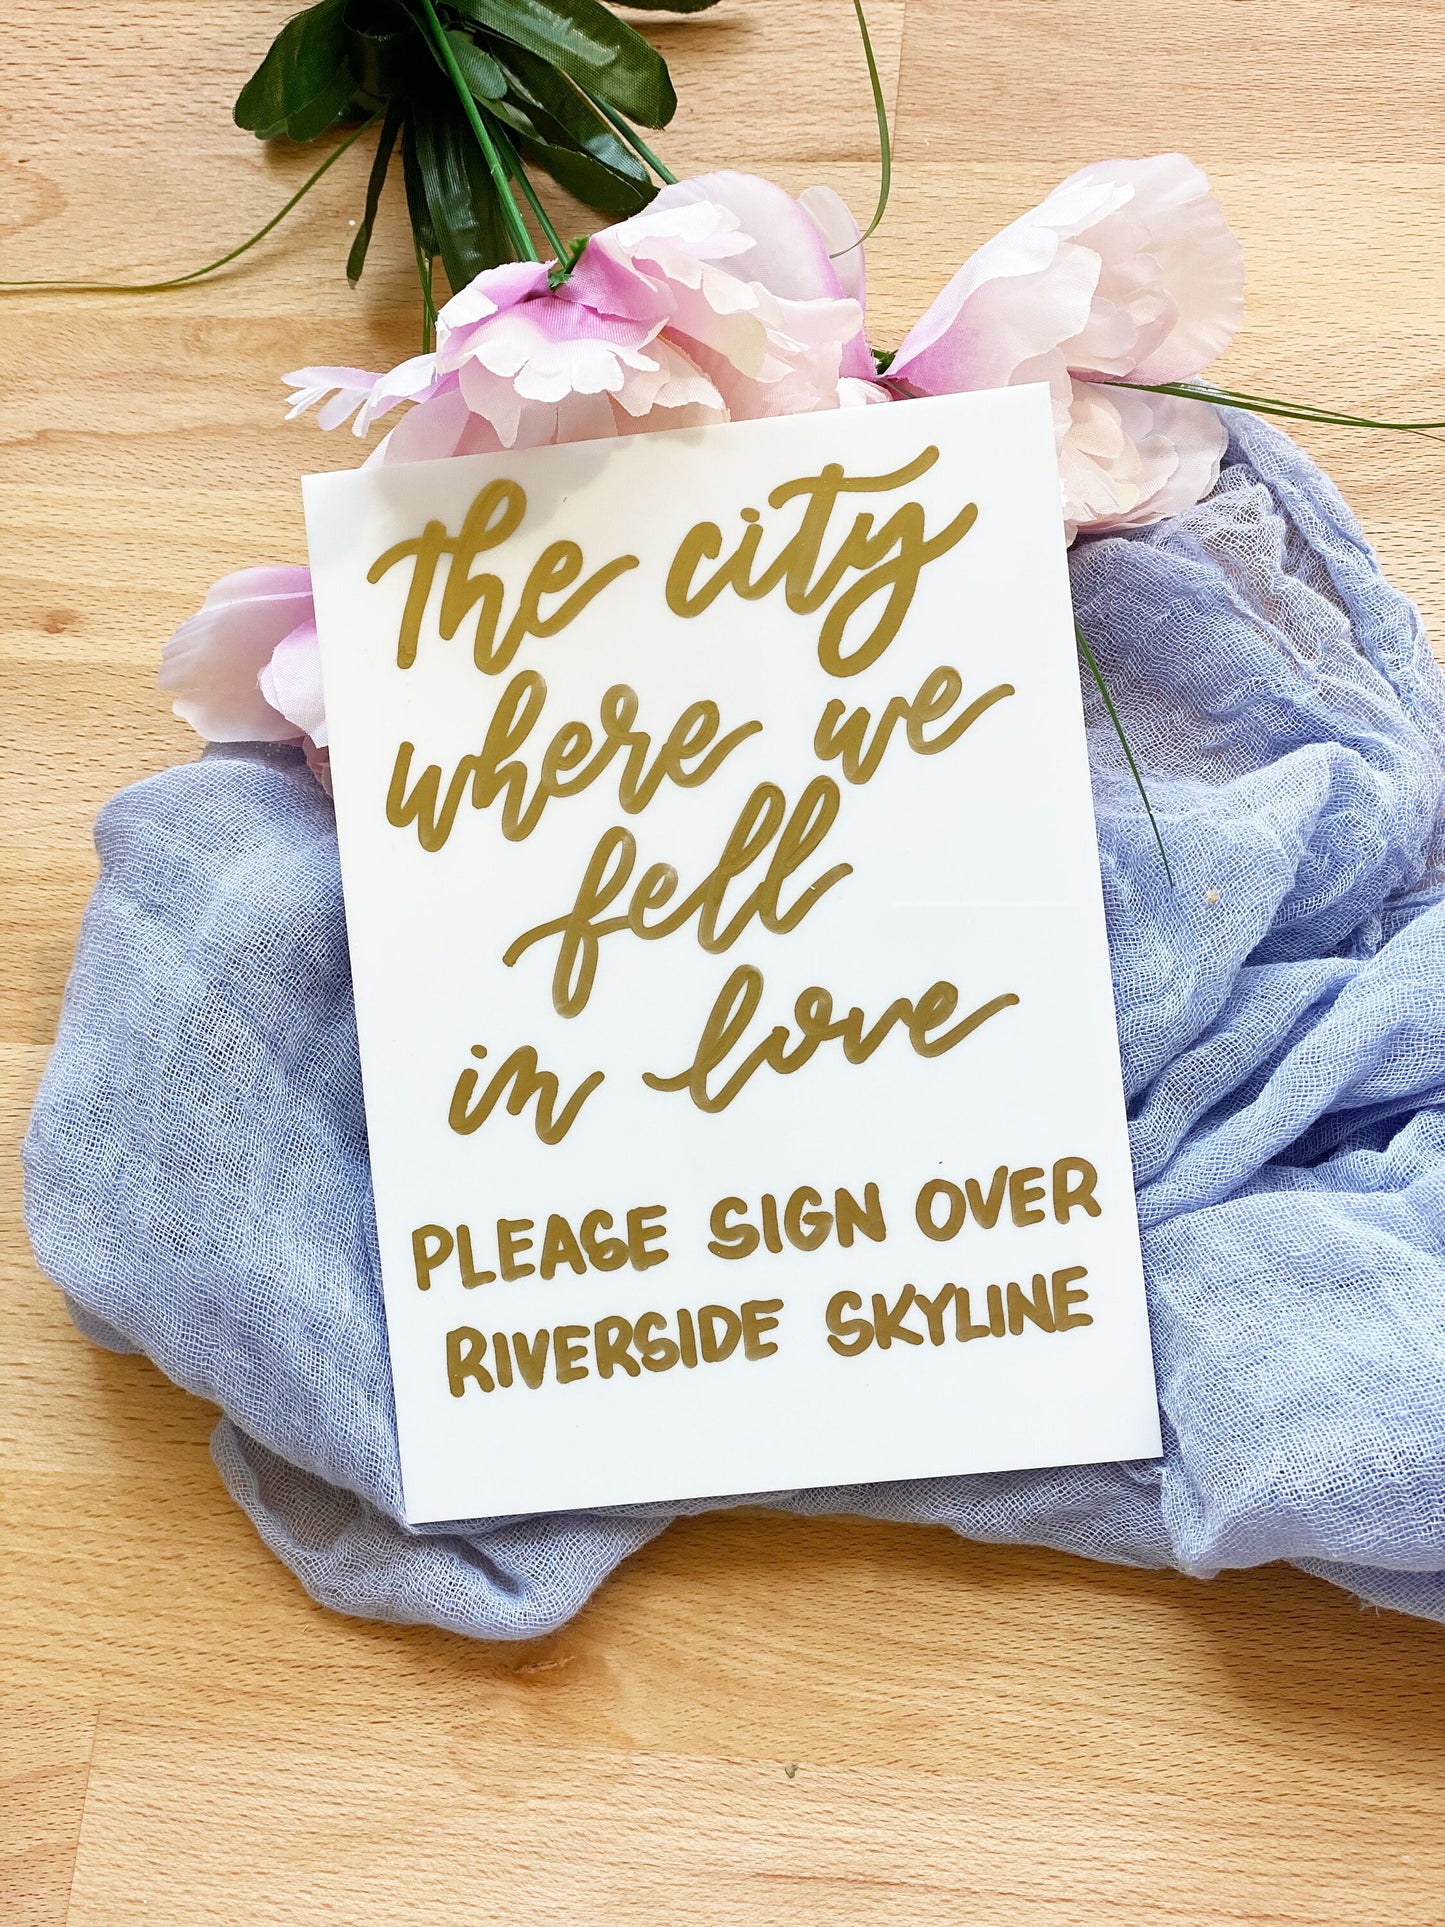 Cards and Gifts Sign | Wedding Favors Sign | White Acrylic Wedding Sign | Custom Verse Acrylic Sign